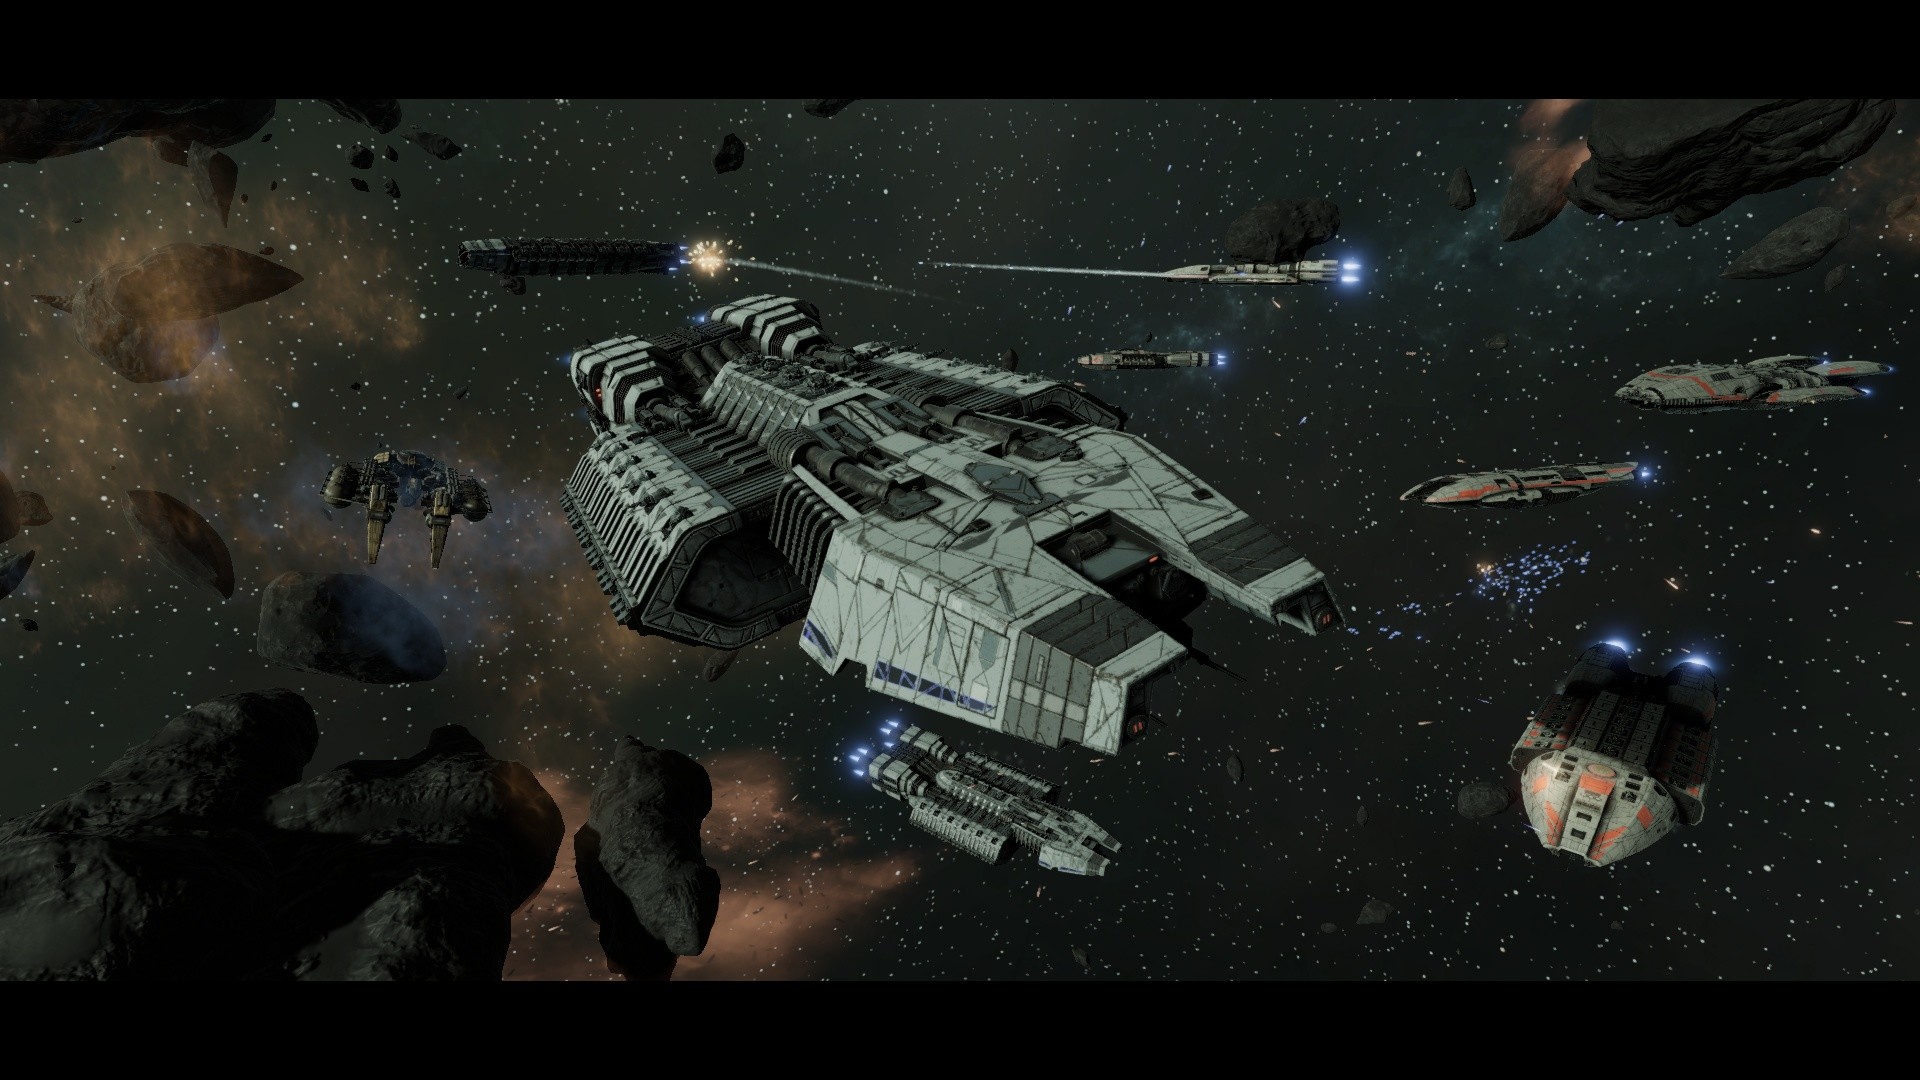 1920x1080 In Battlestar Galactica: Deadlock, battlestar-class multi-role carrier  ships are the newest ships in the Colonial fleets. Black Lab  Games/Slitherine. “